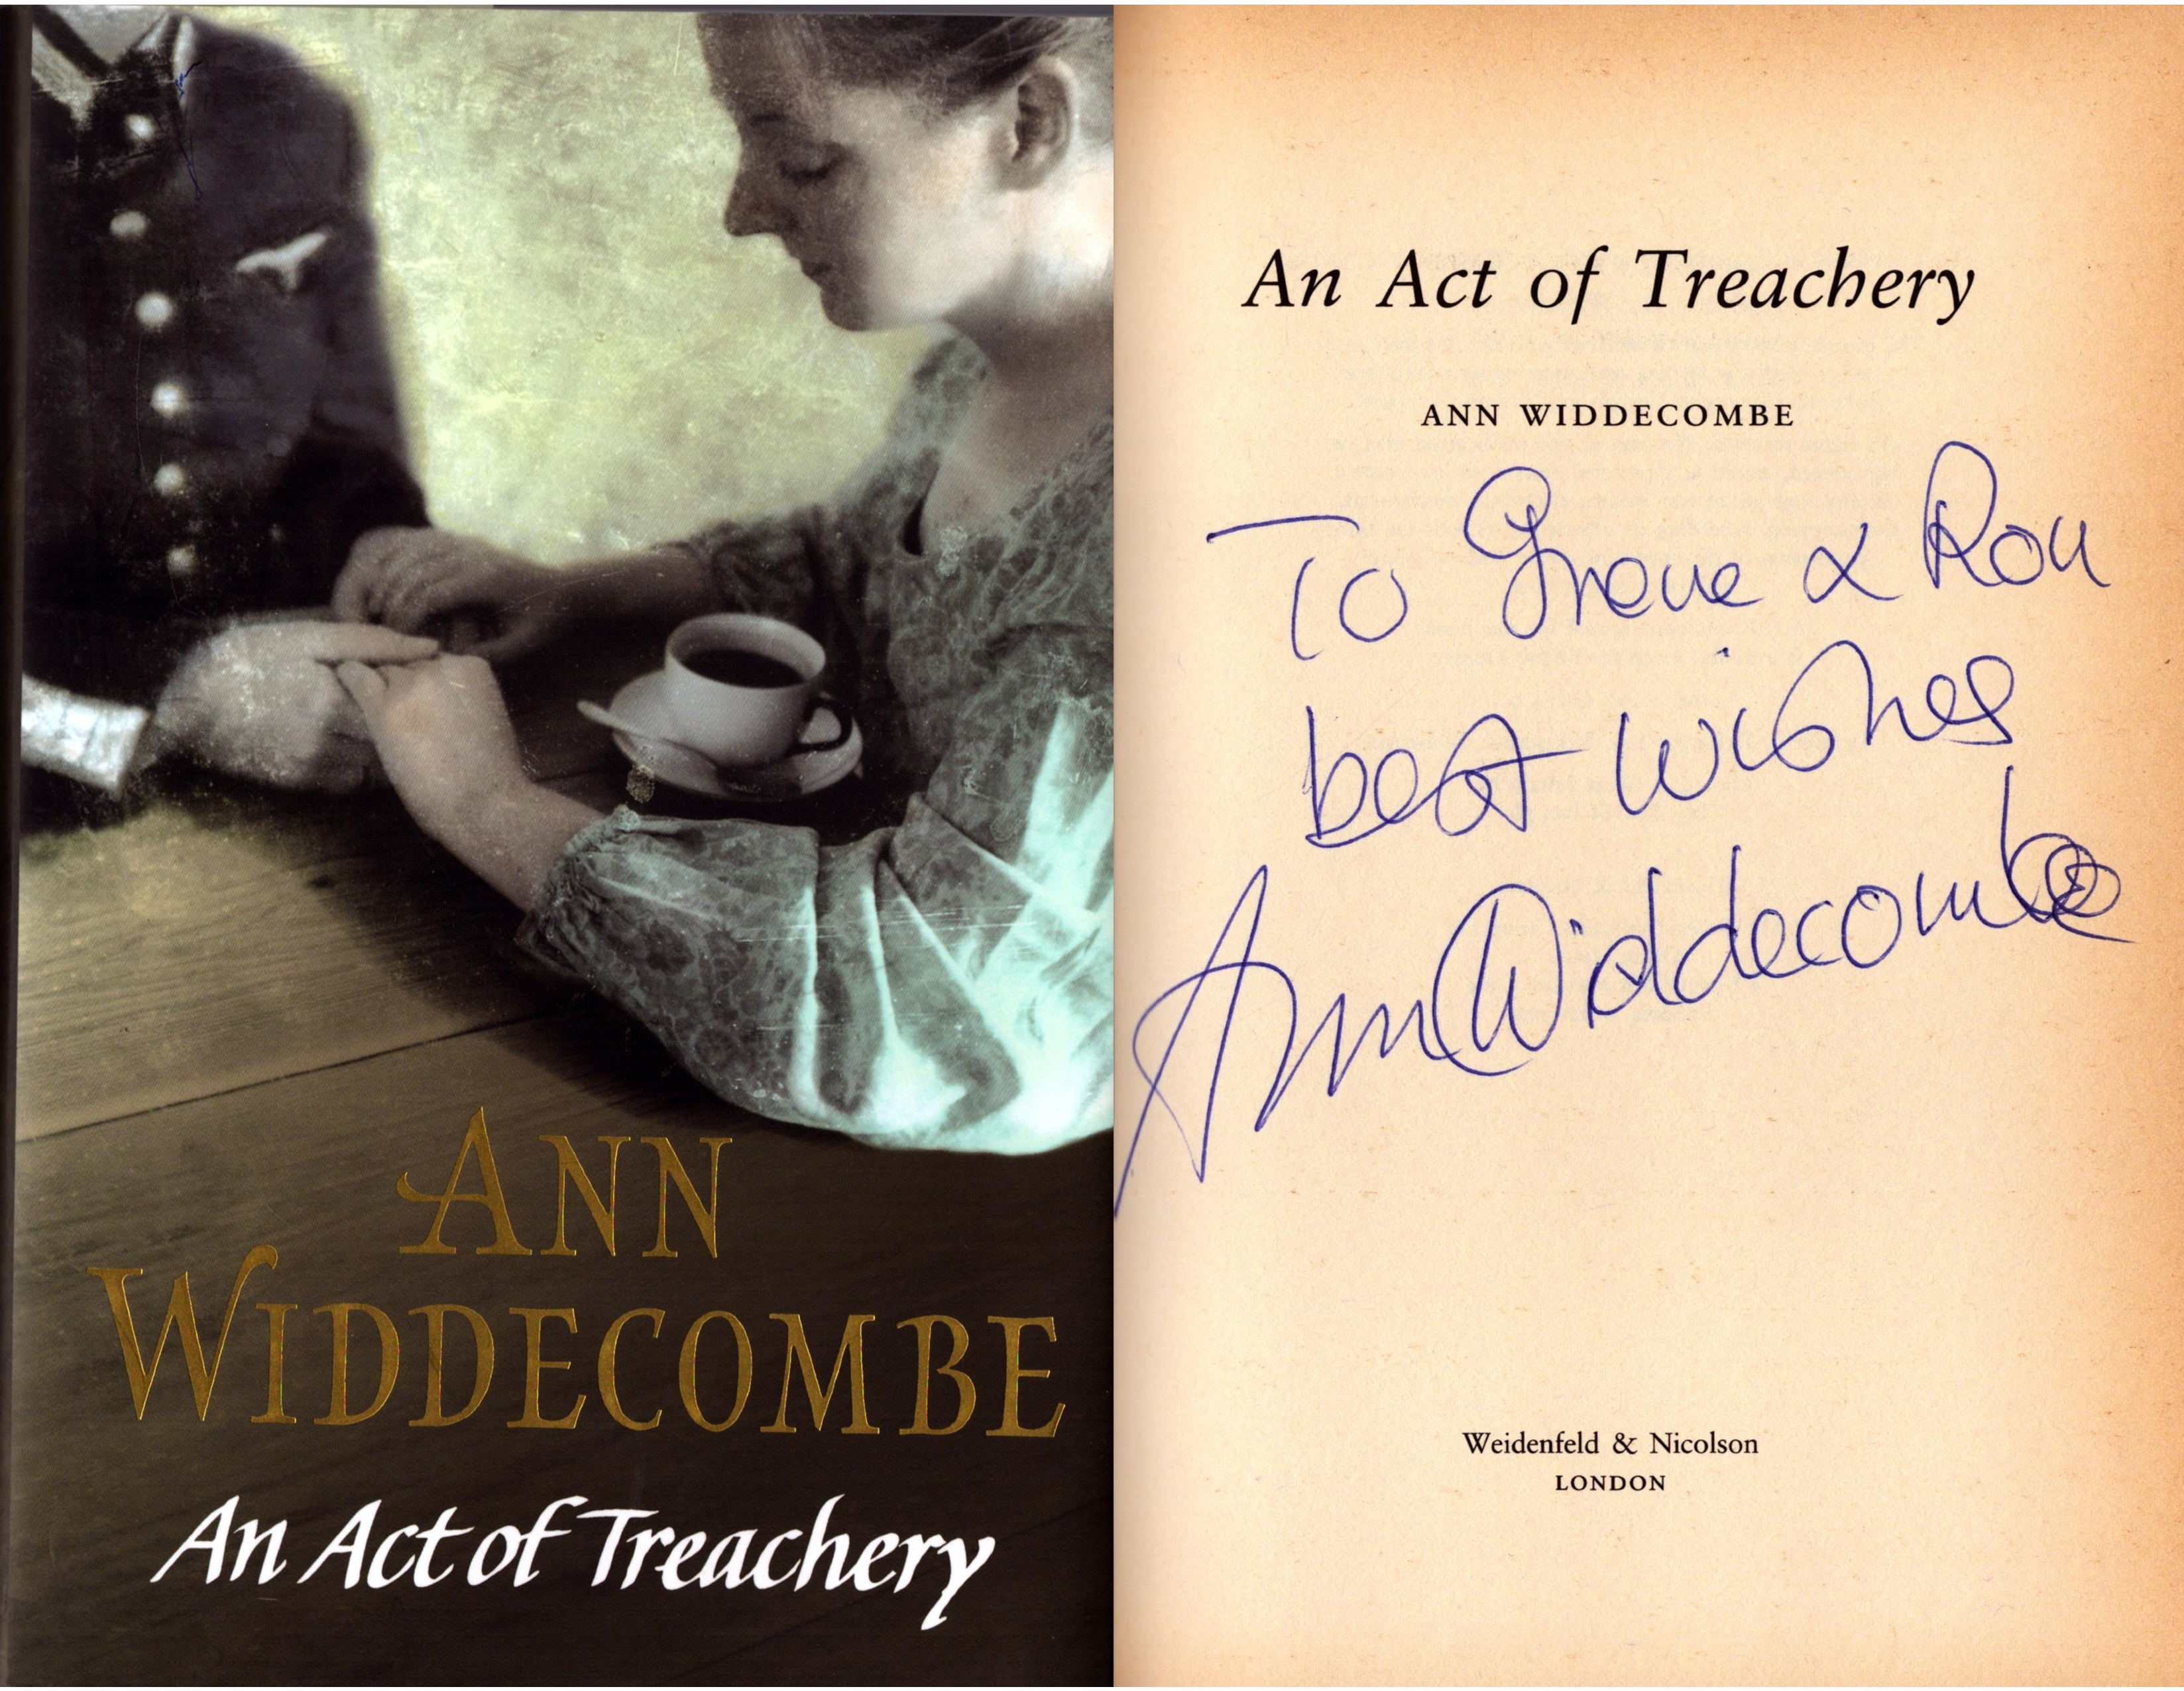 An Act of Treachery by Ann Widdecombe signed by author, First Edition hardcover book with dust